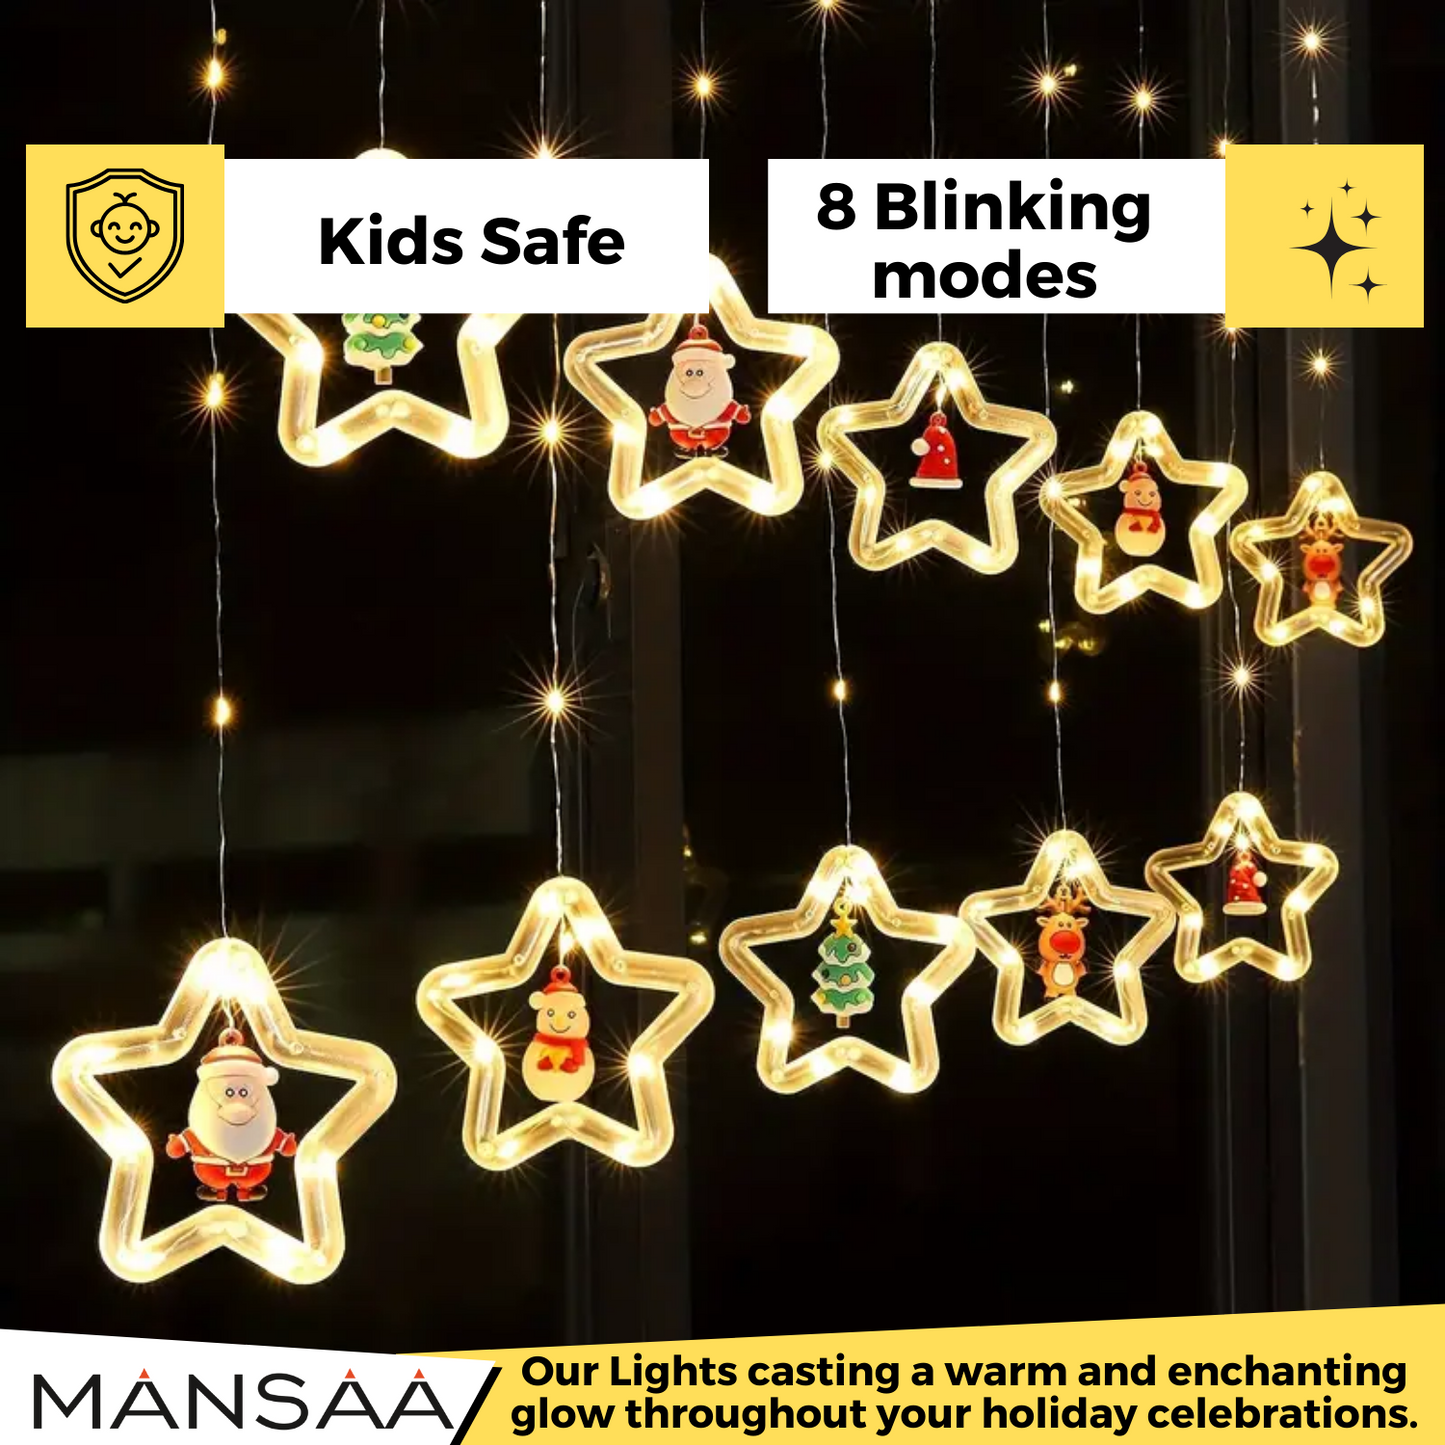 Star Christmas Lights, 4 Meter Direct Plug Christmas Light String with 10 Cute icons | DIY Christmas Decor |8 Blinking Mode | Decorative Fairy curtain Lights for Indoor Outdoor Party Bedroom Home Decor | Warm White